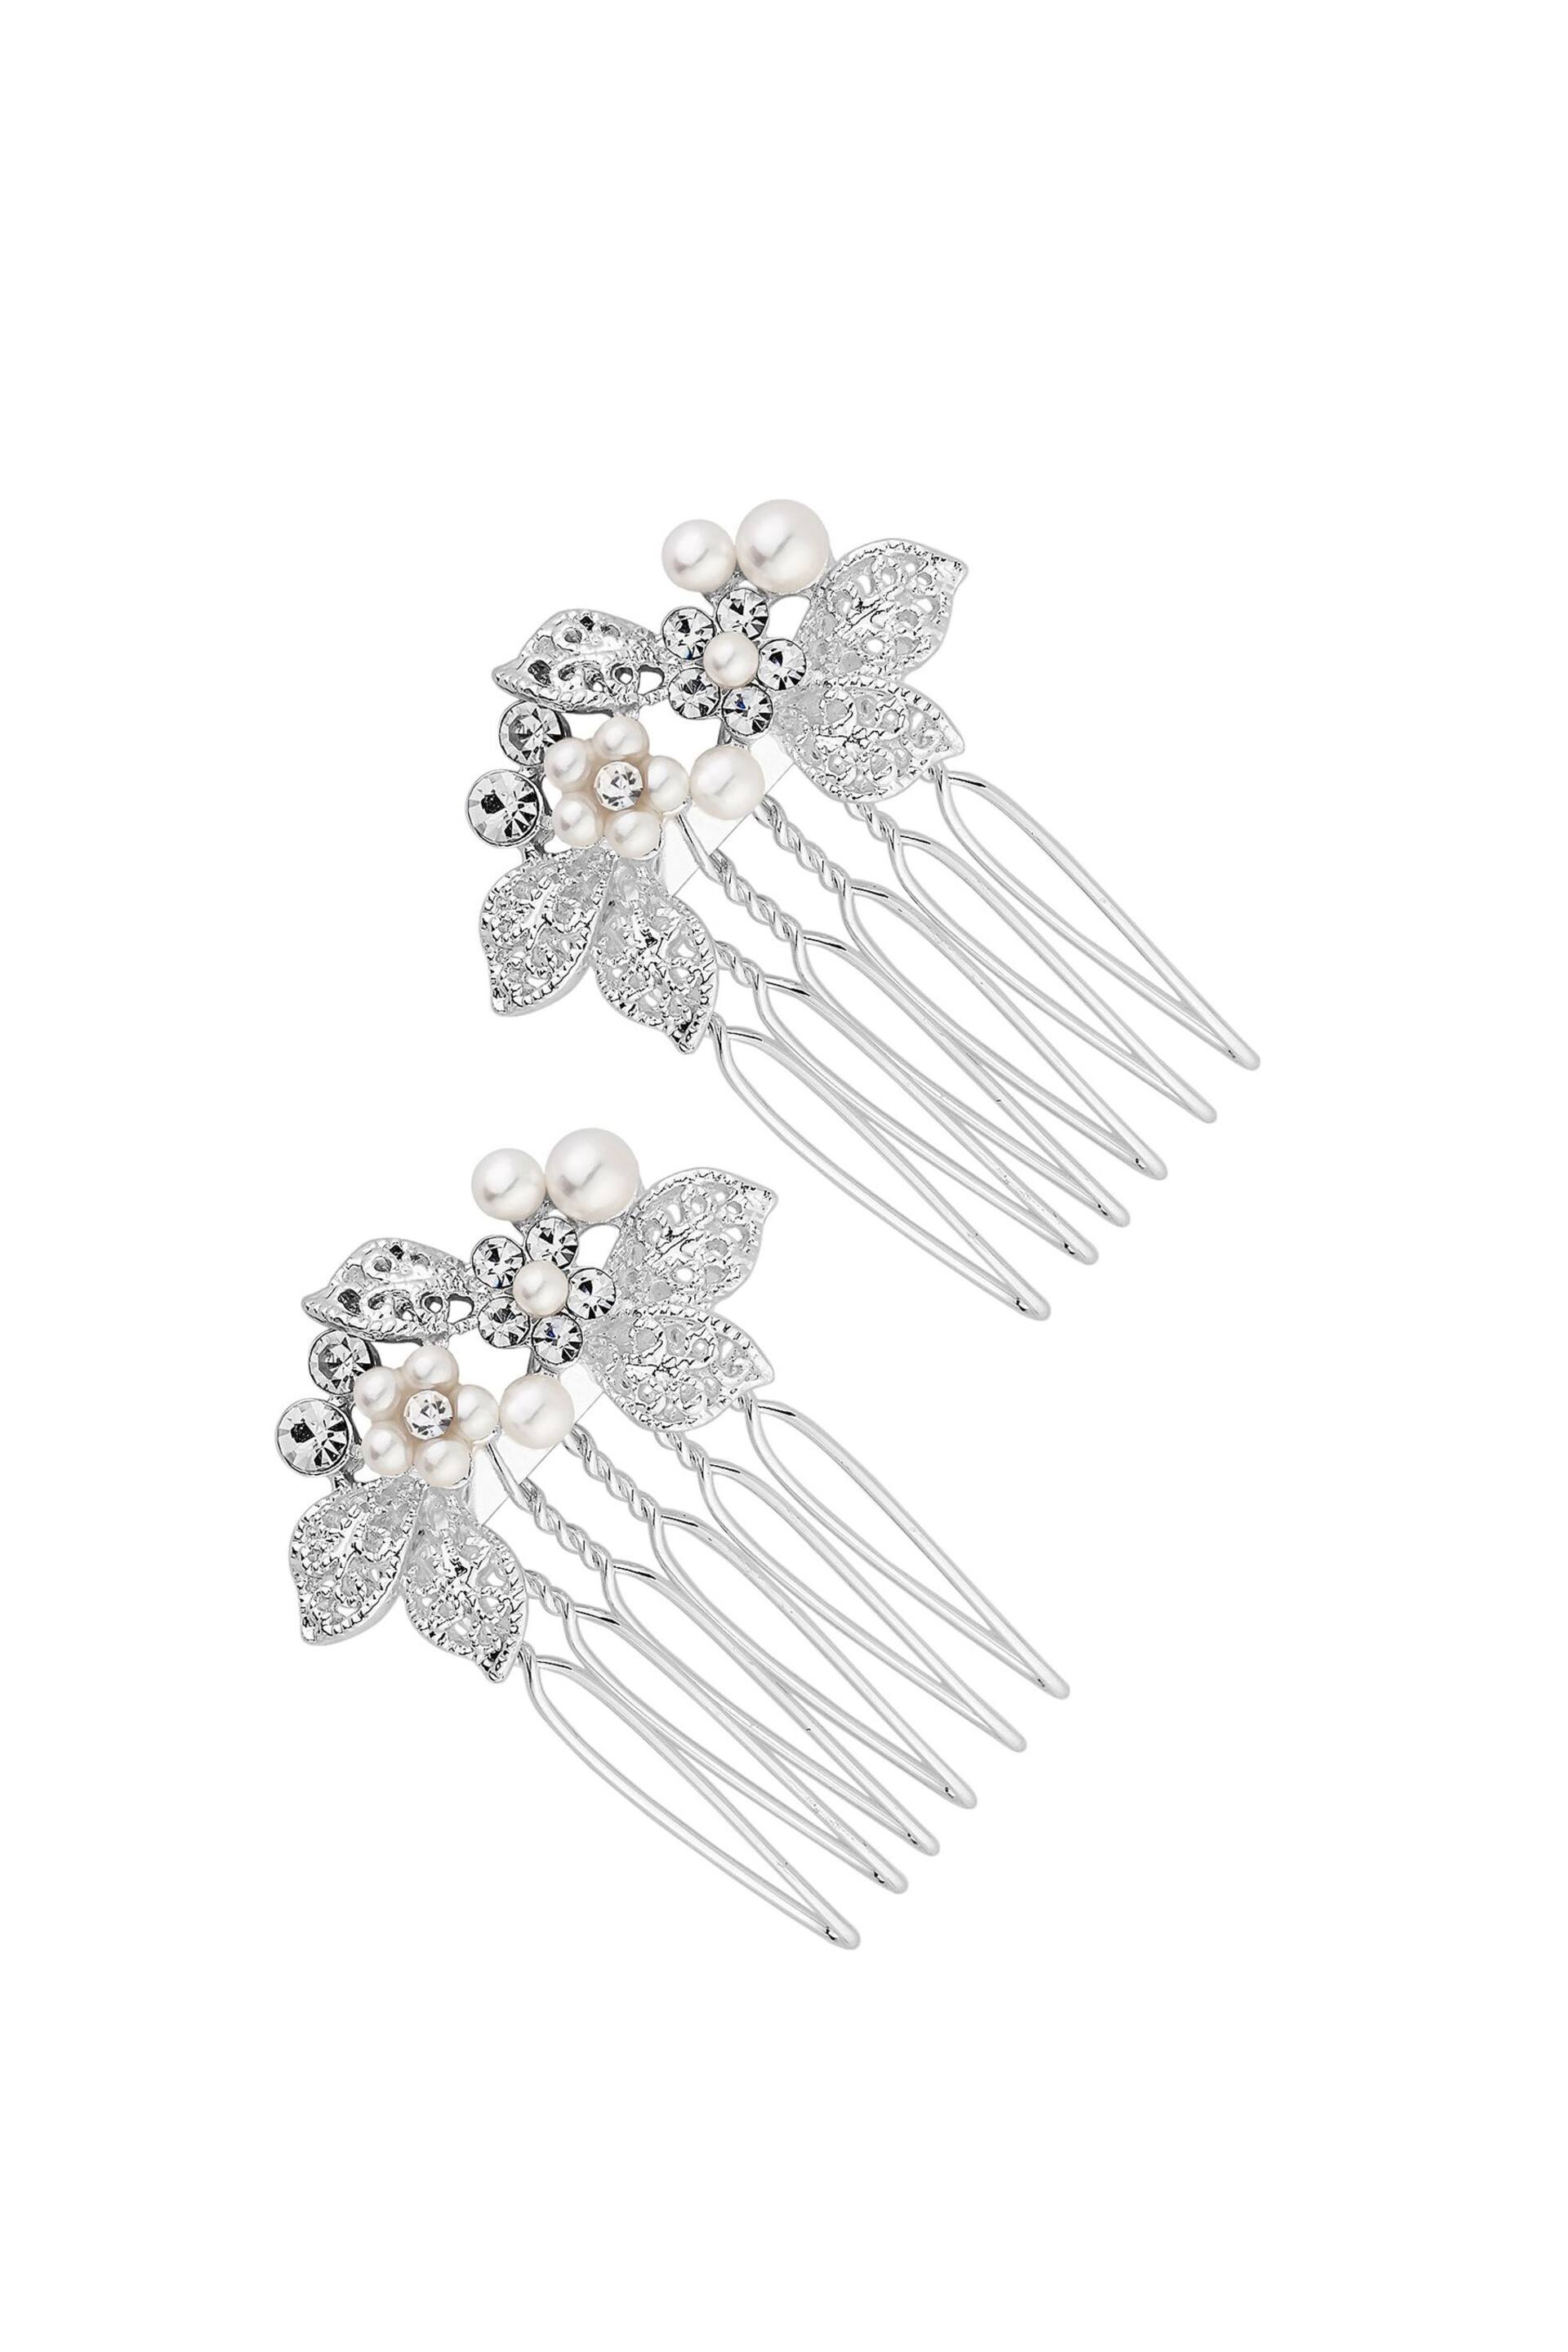 Jon Richard Silver Jessica Mini Floral Combs 2 Pack - Image 1 of 3